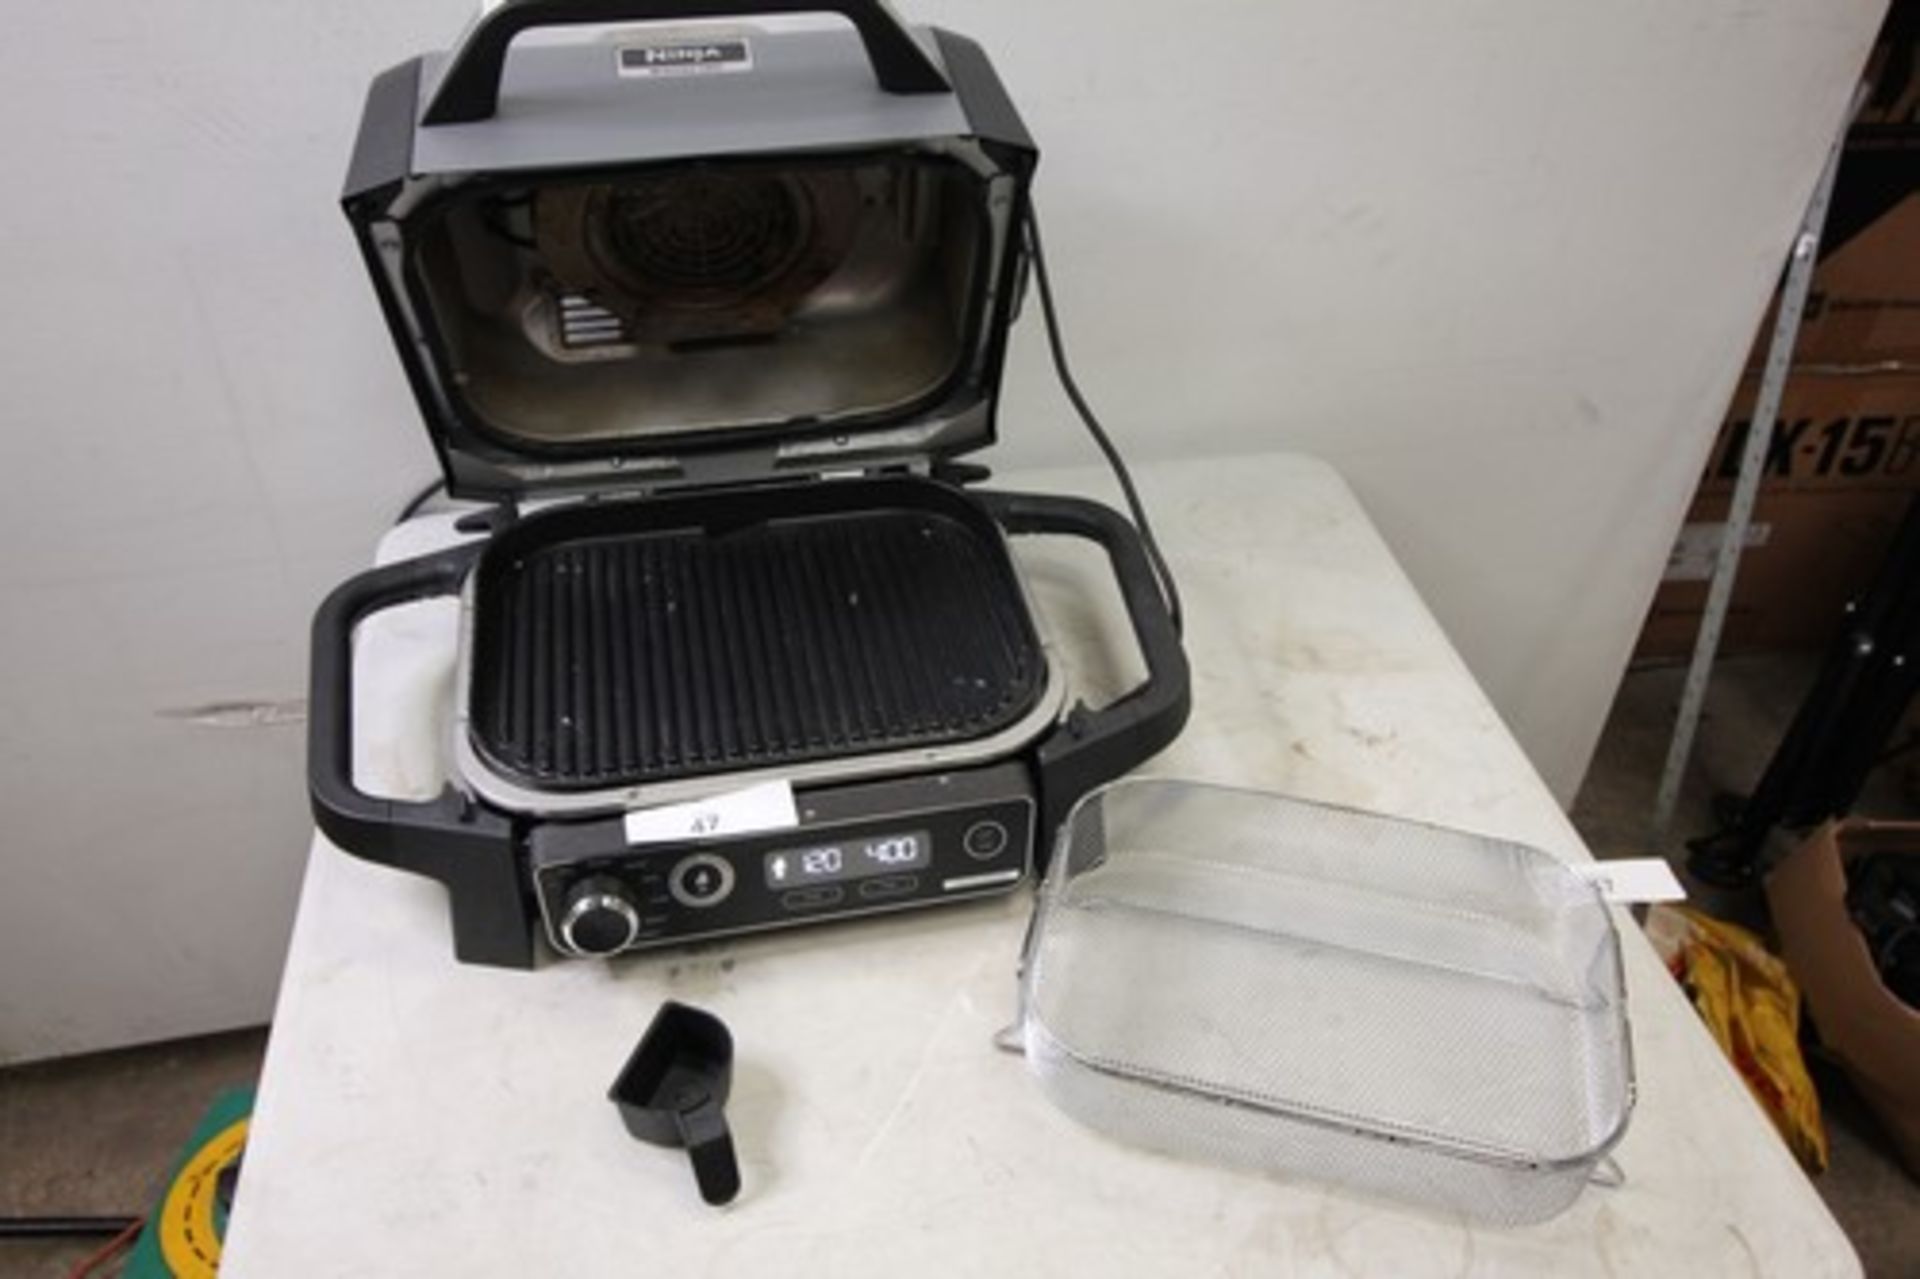 1 x Ninja wood fire outdoor electric grill, model OG701UK, powers on but not fully tested - Used (